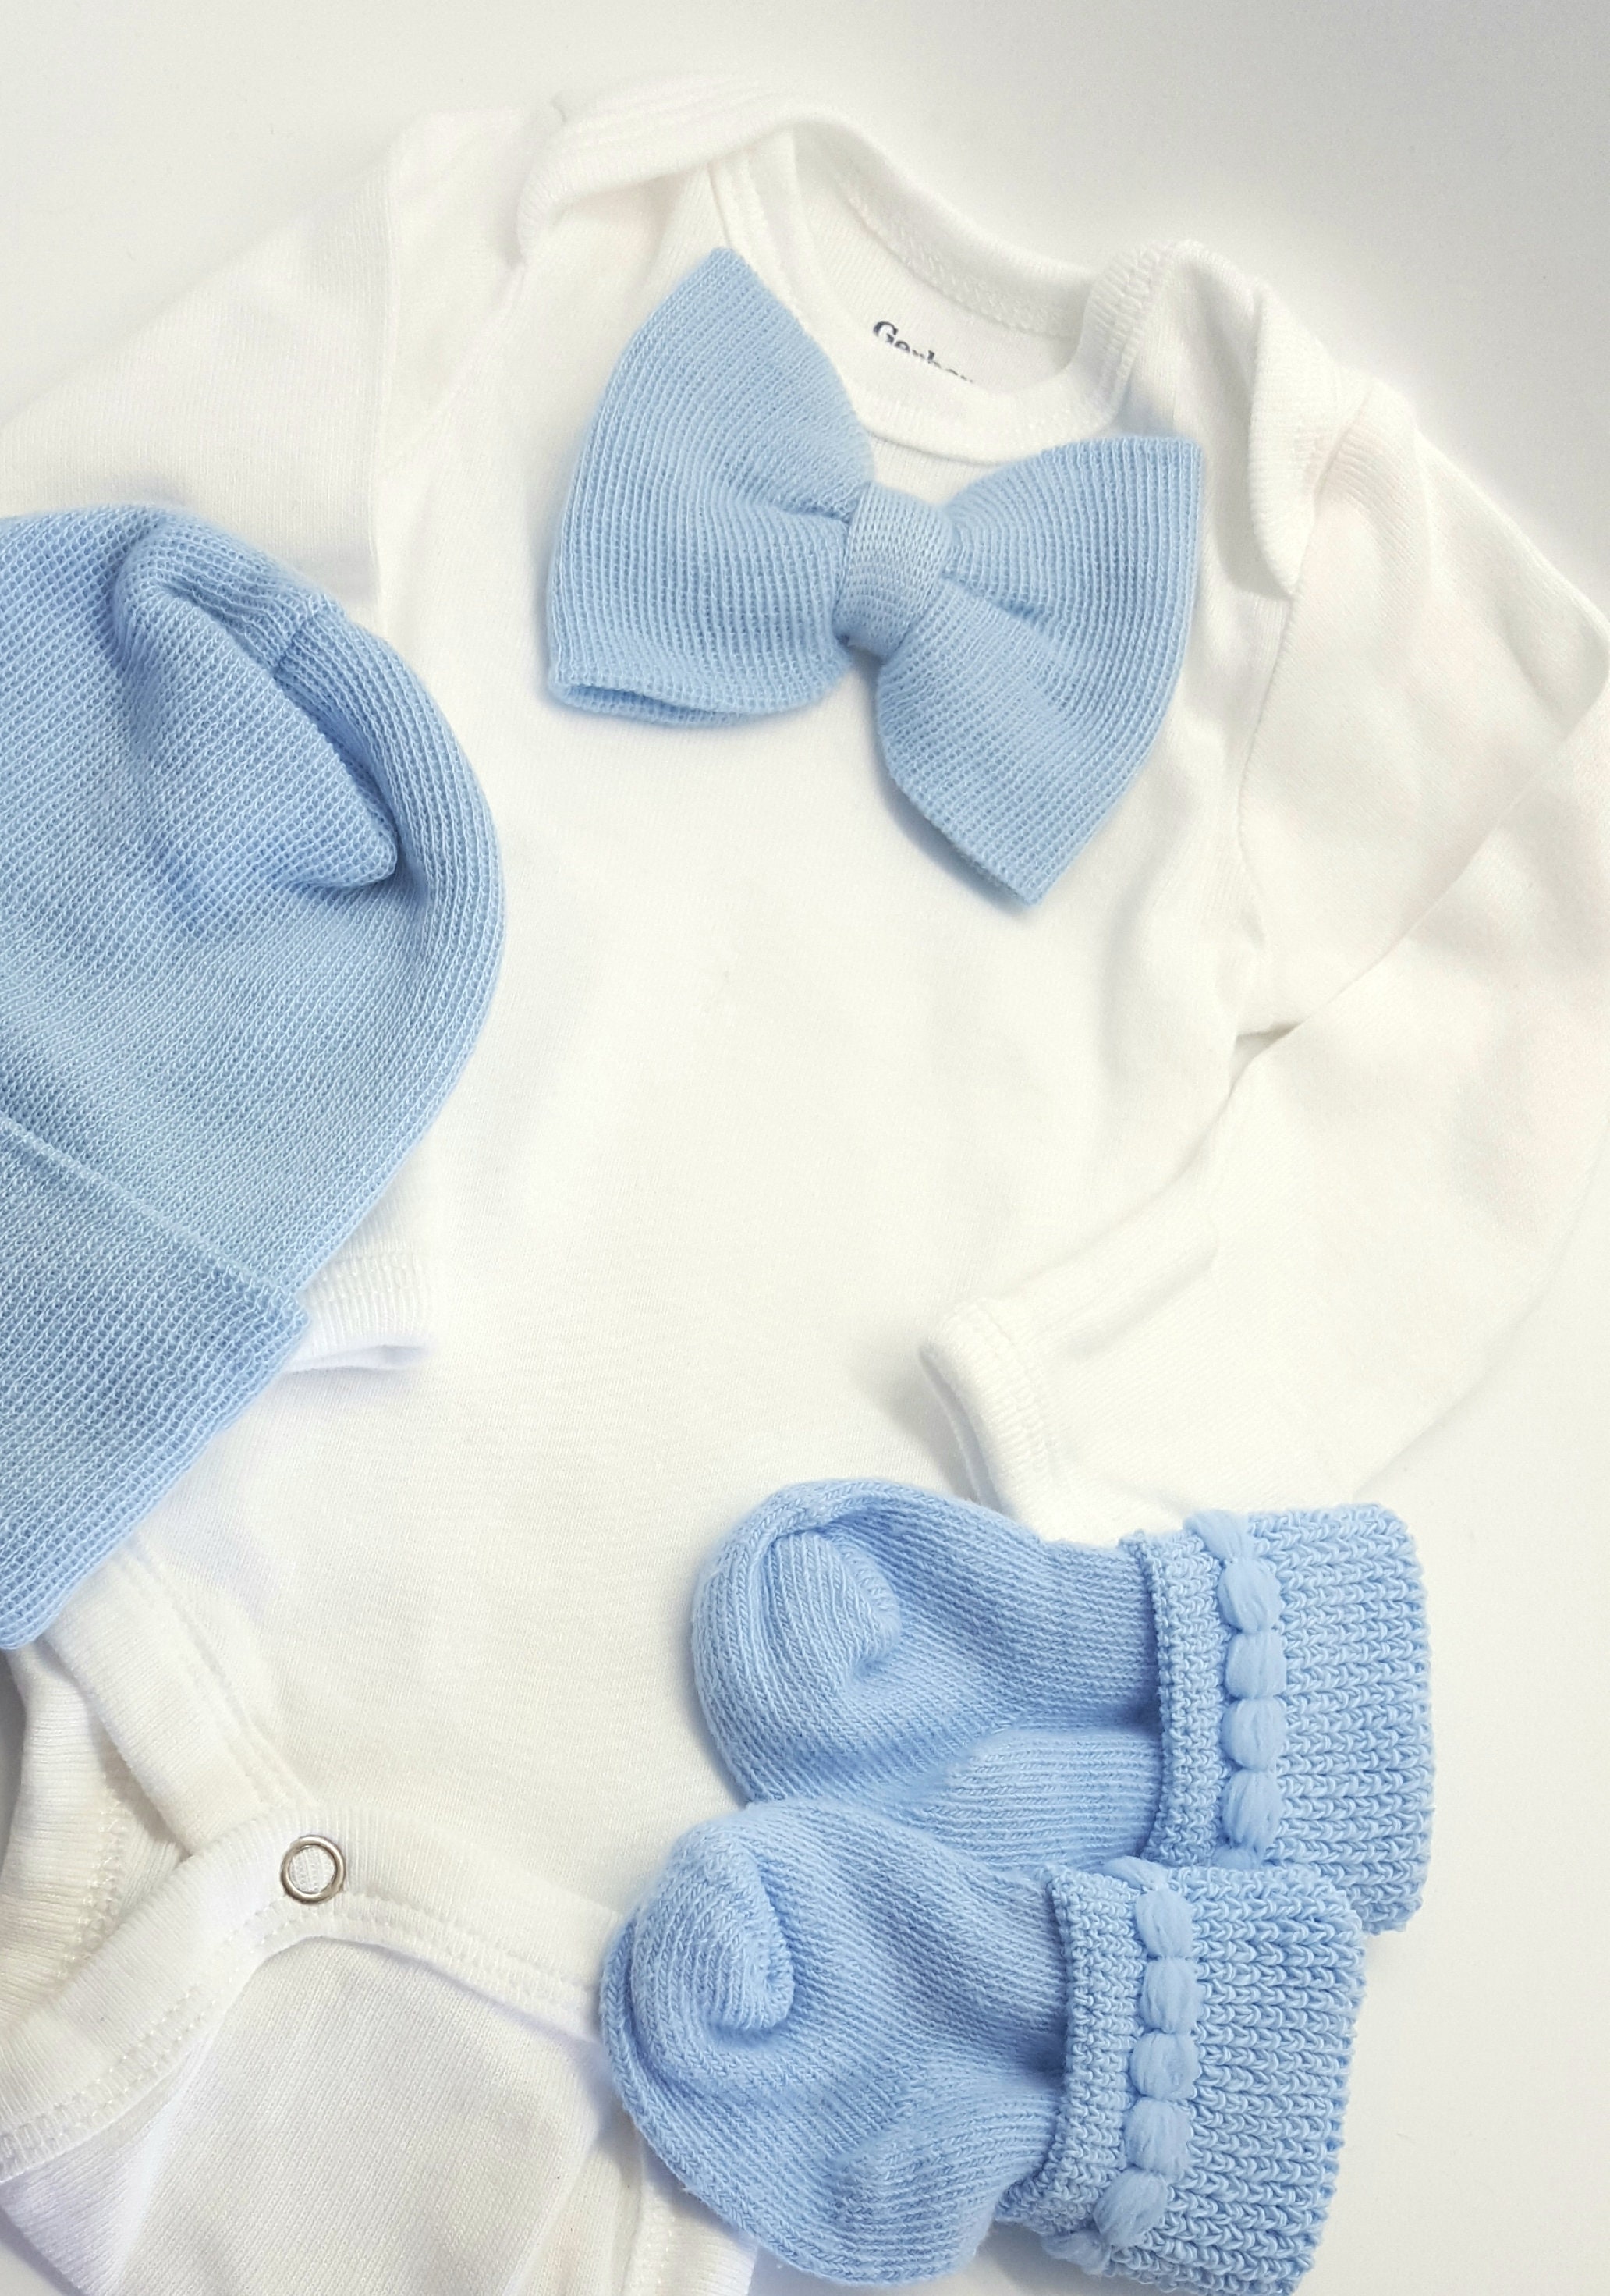 Newborn Boy Bow-tie Outfit With Matching Hat and Sock Set. | Etsy